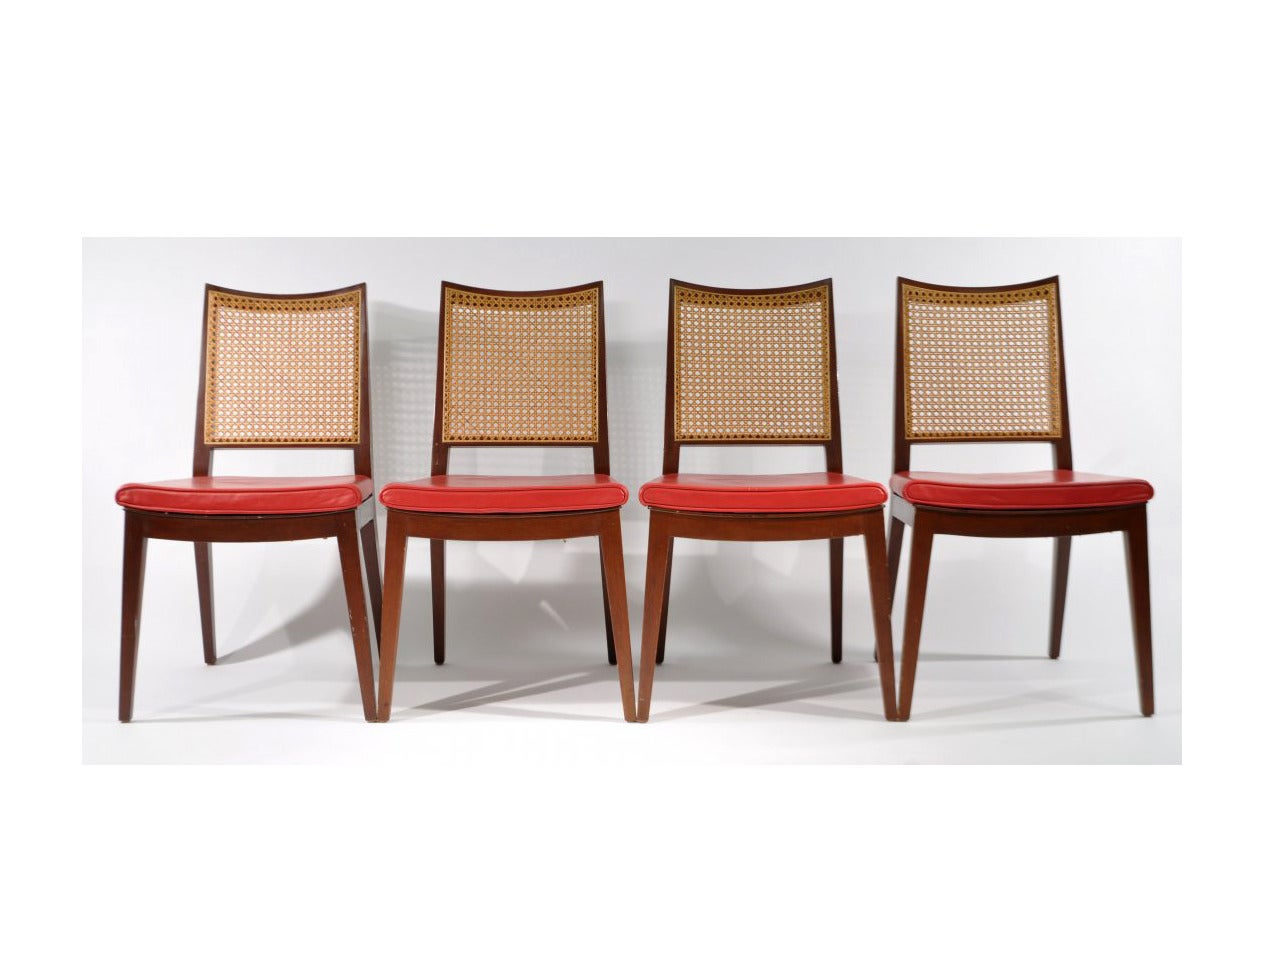 A nice set of four walnut side chairs by Edward Wormley for Dunbar. Leather seats with slightly curved caned back. Simple and elegant form with a Japanese sensibility. They retain Dunbar brass tags underneath.